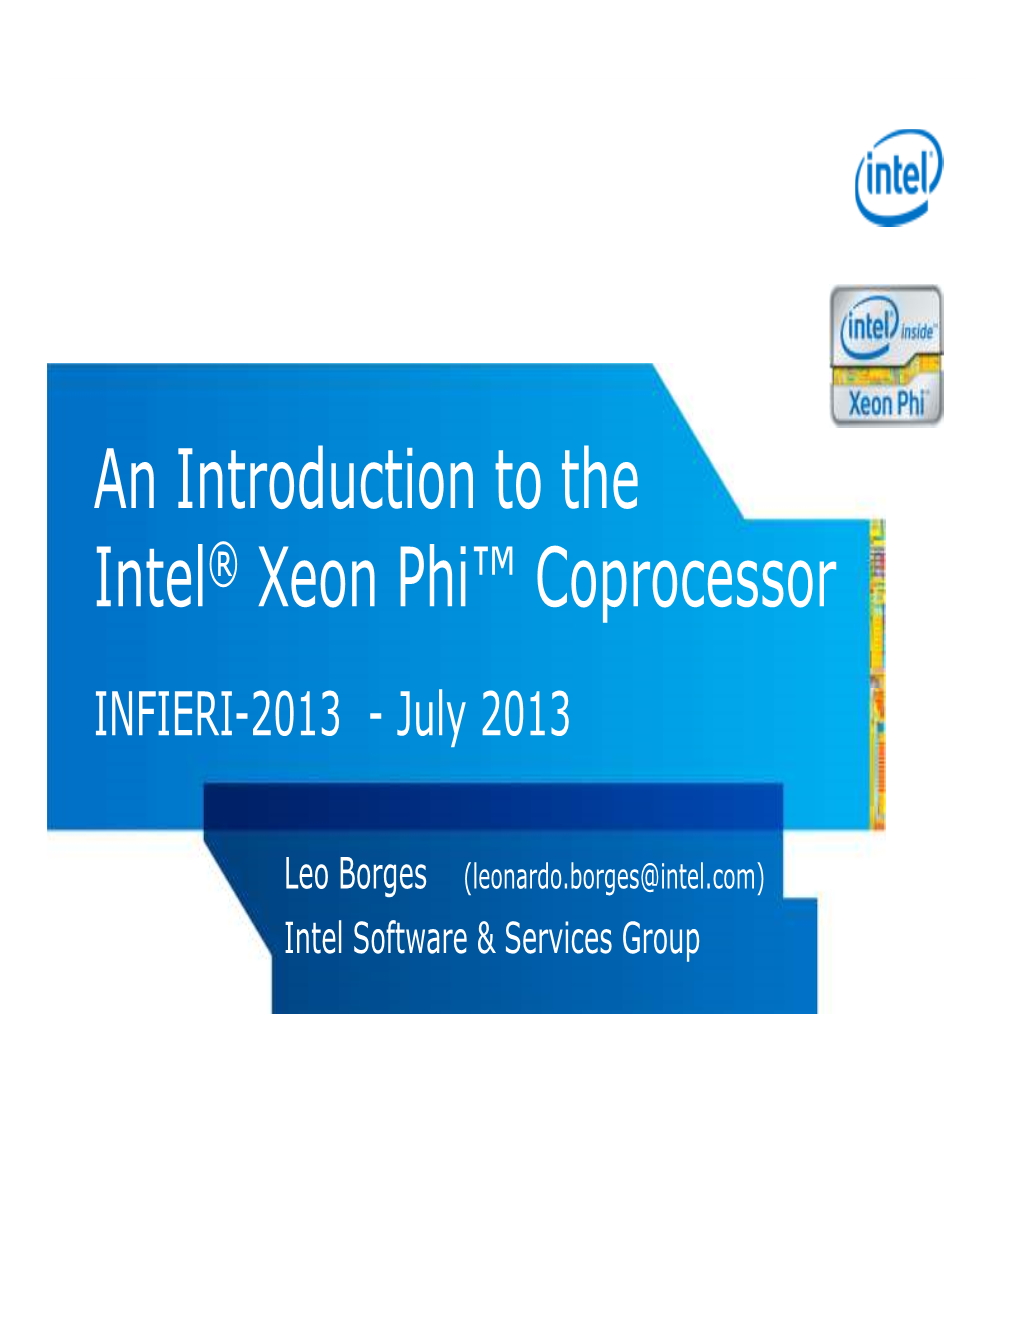 An Introduction to the Intel® Xeon Phi™ Coprocessor